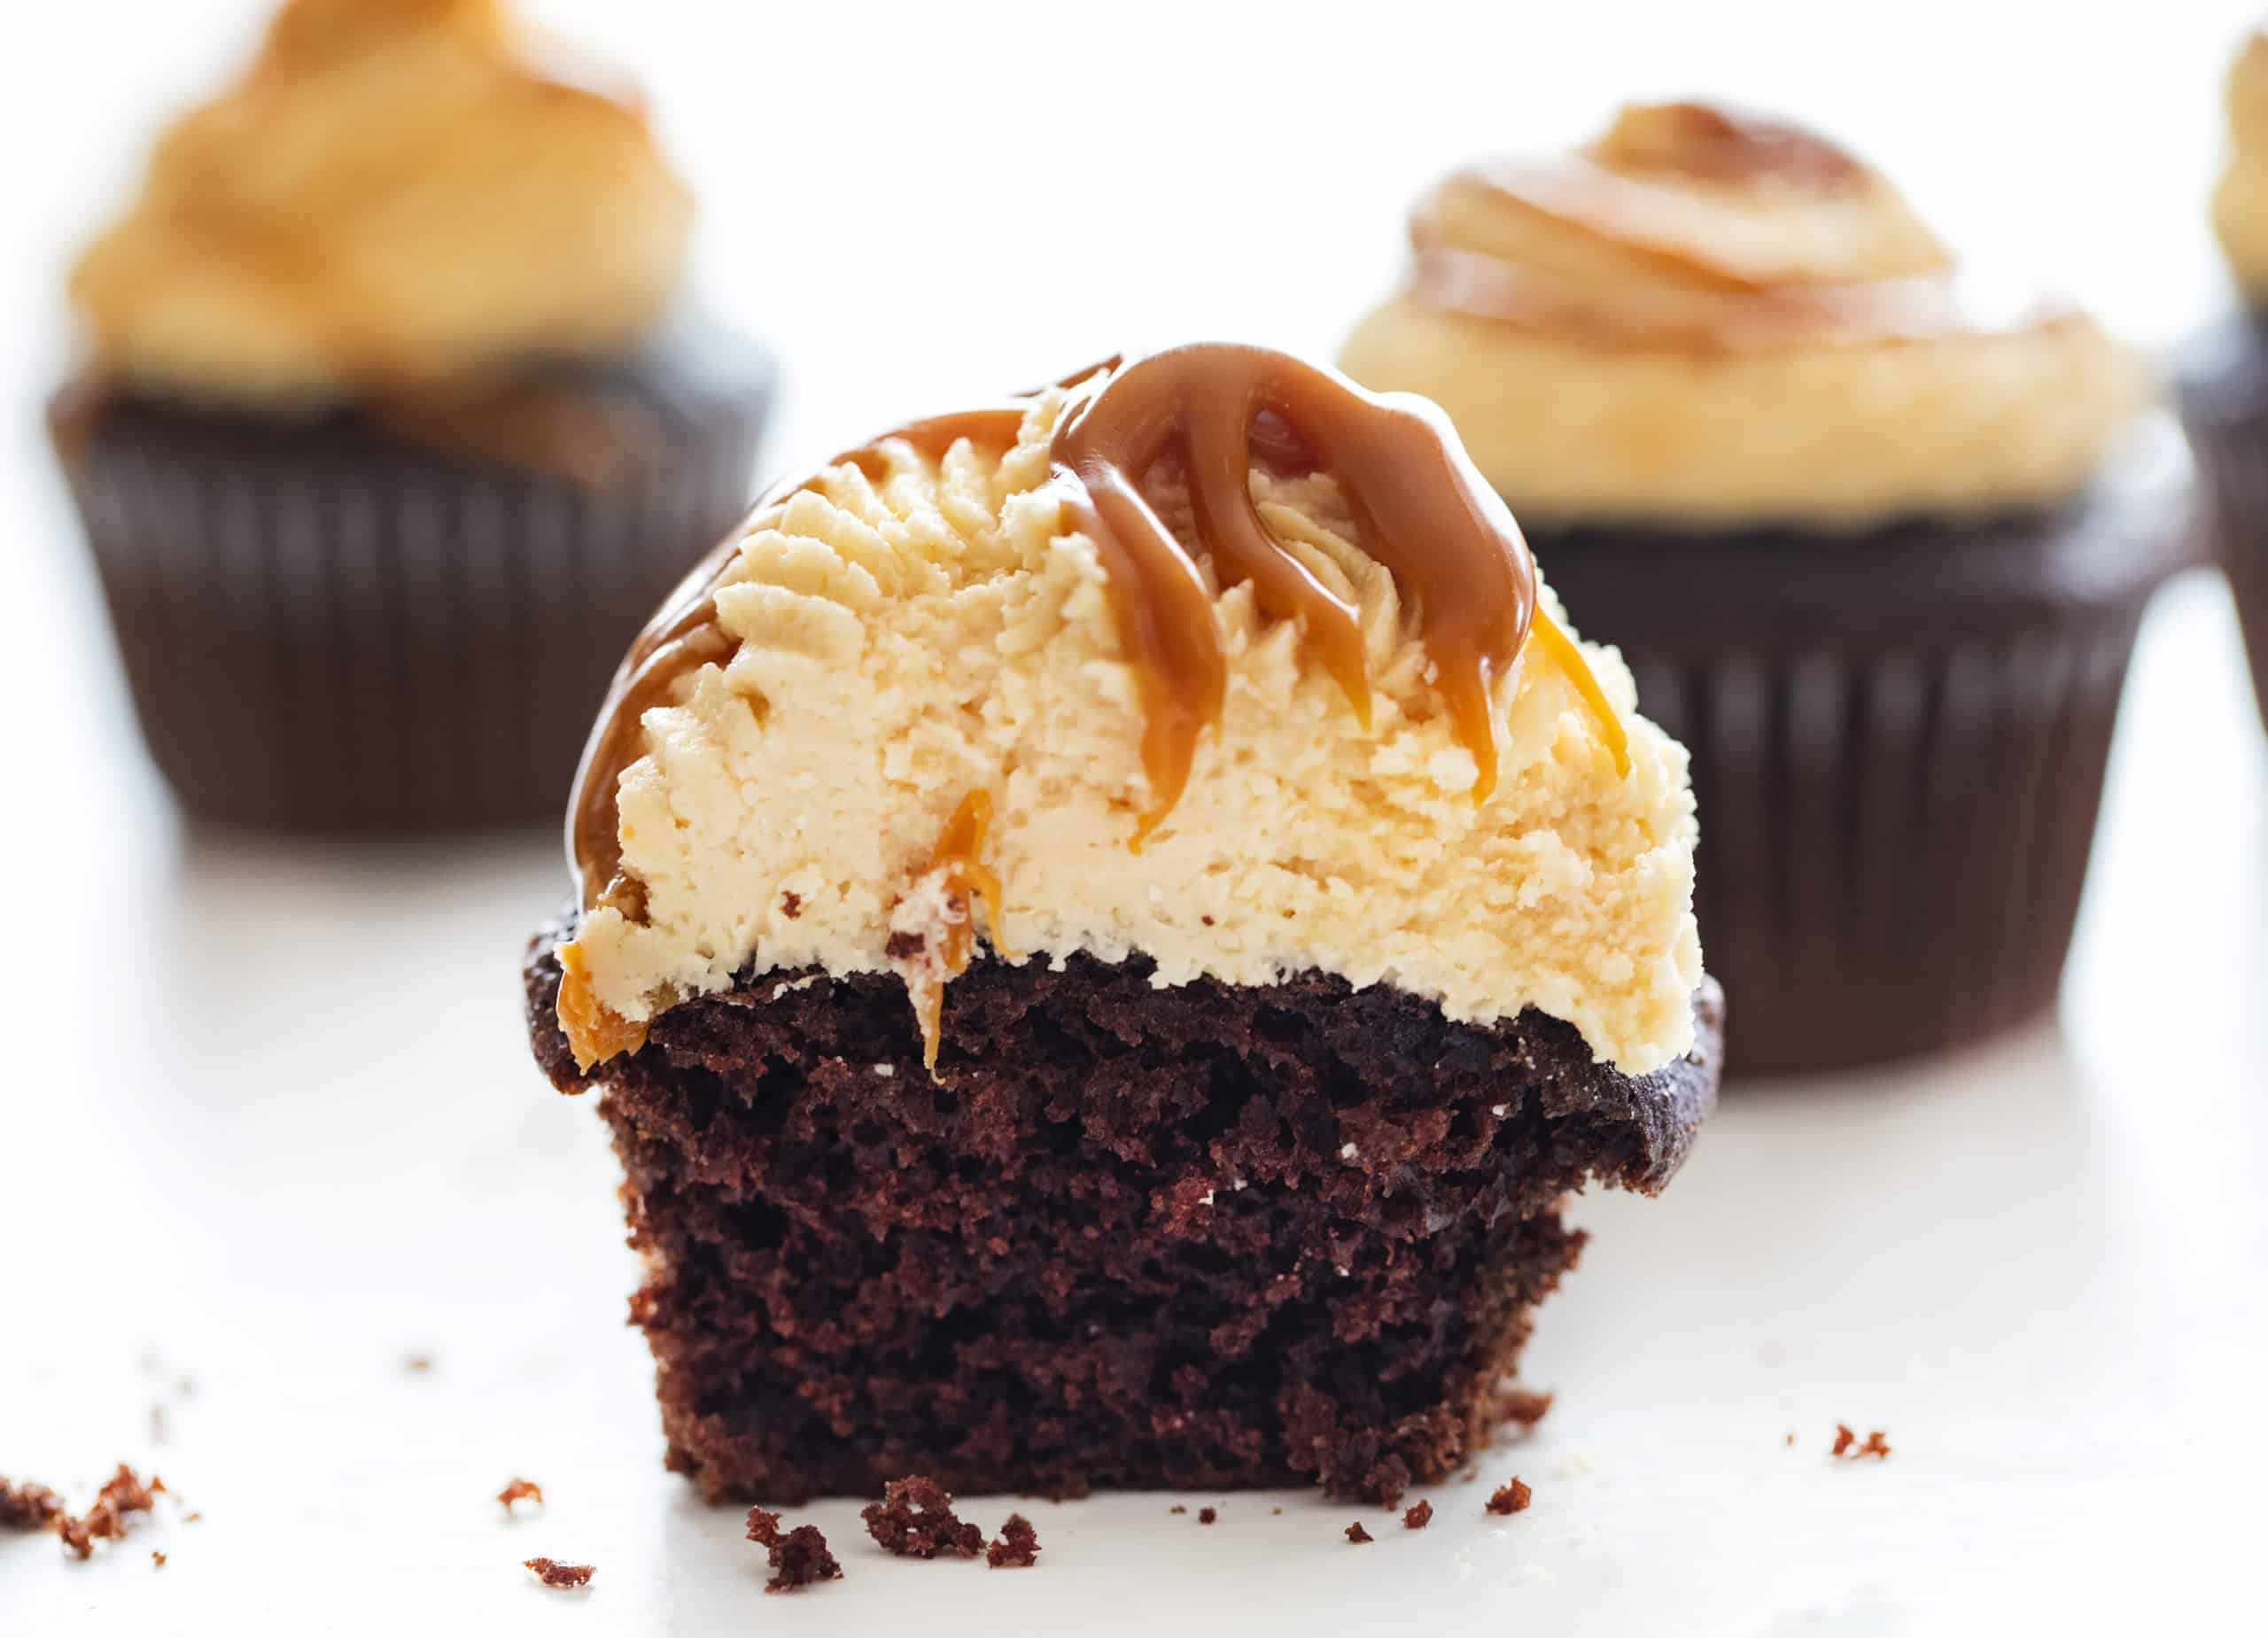 Cut into Chocolate Cupcakes with Salted Caramel Buttercream